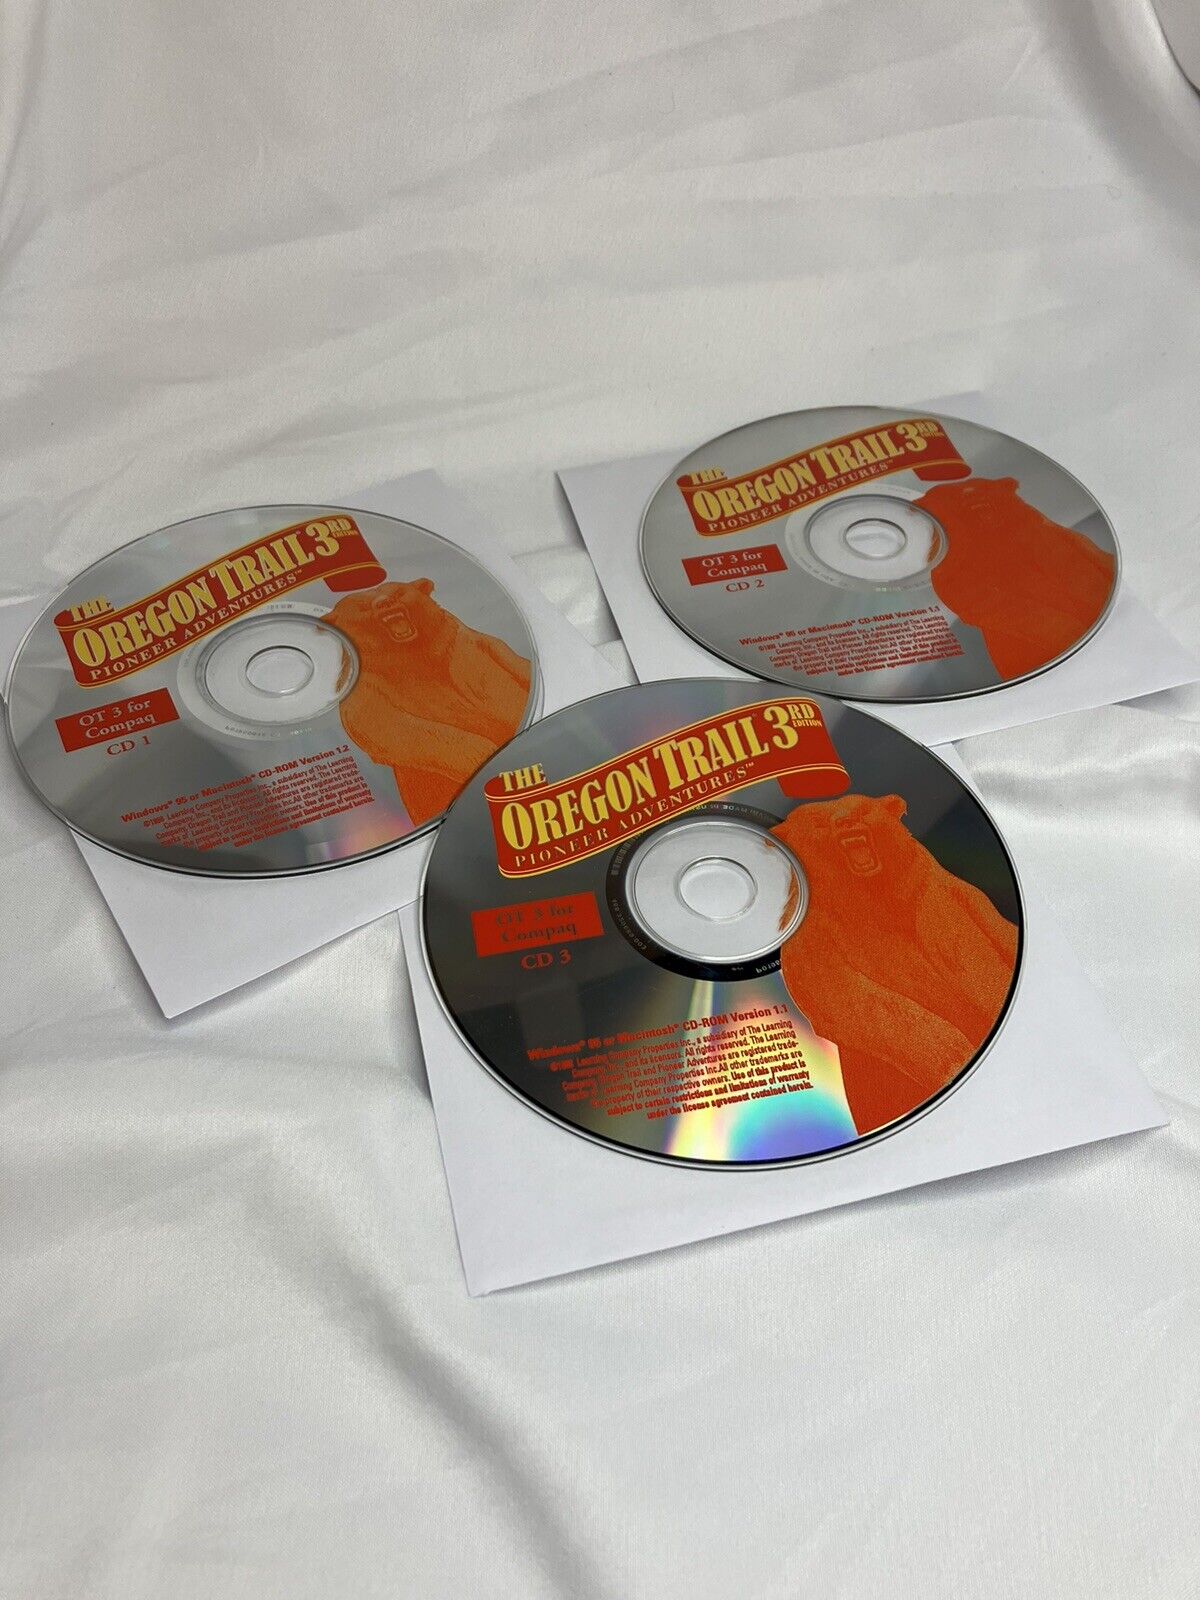 Vintage The Oregon trail 3rd edition 3 CD PC game windows 95